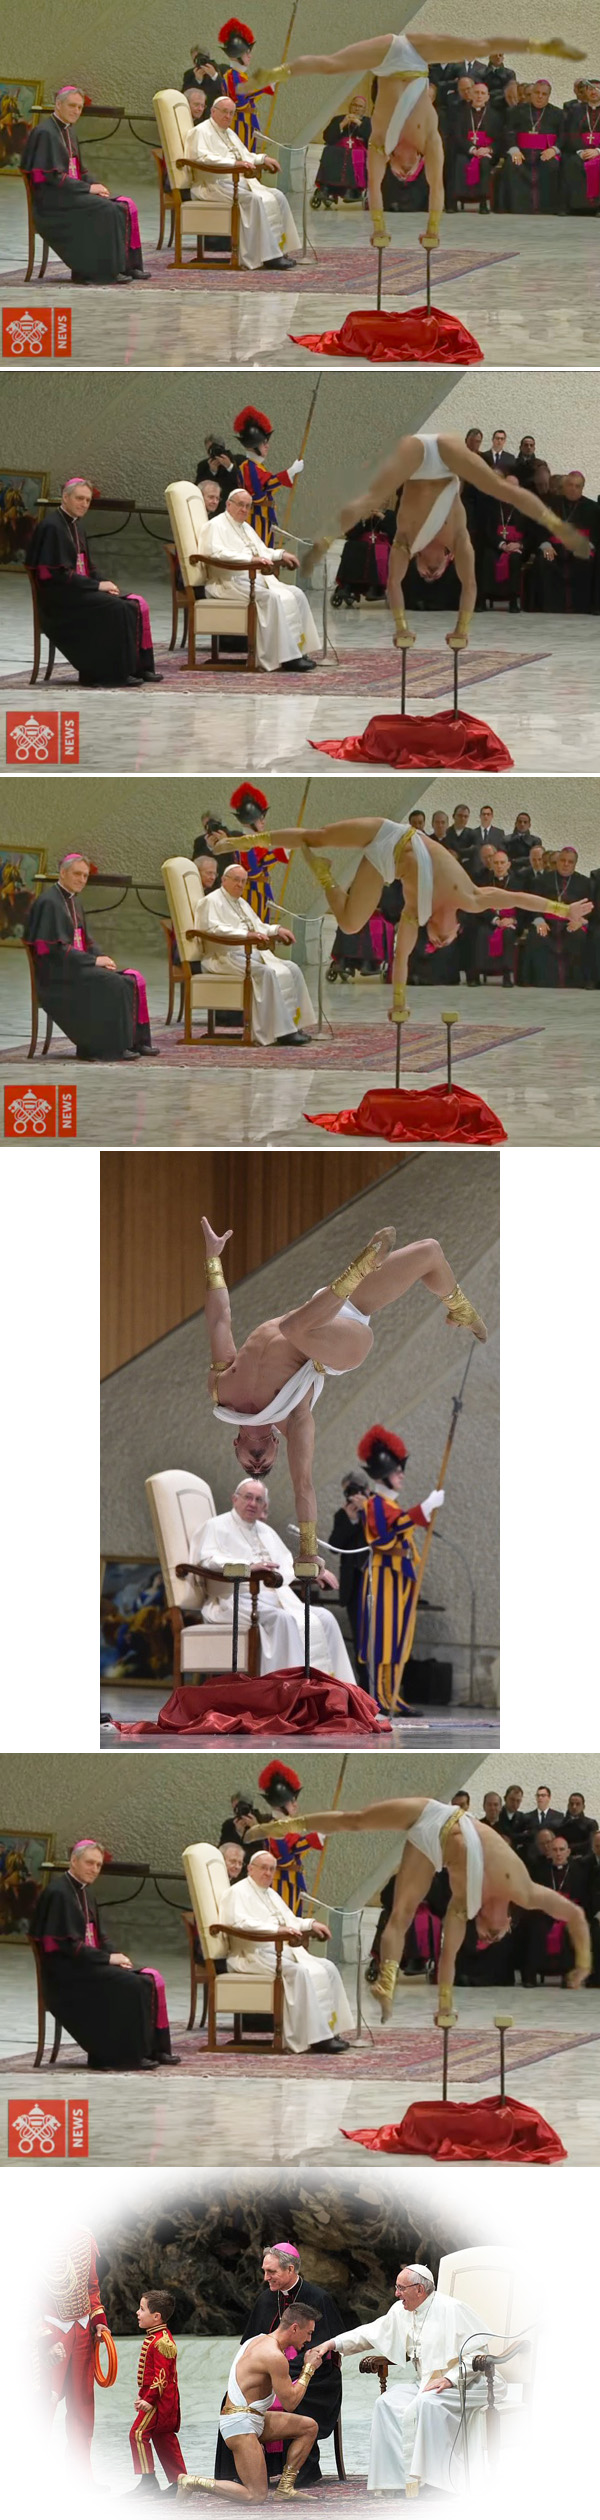 A photo montage showing Pope Francis admiring male body contortions